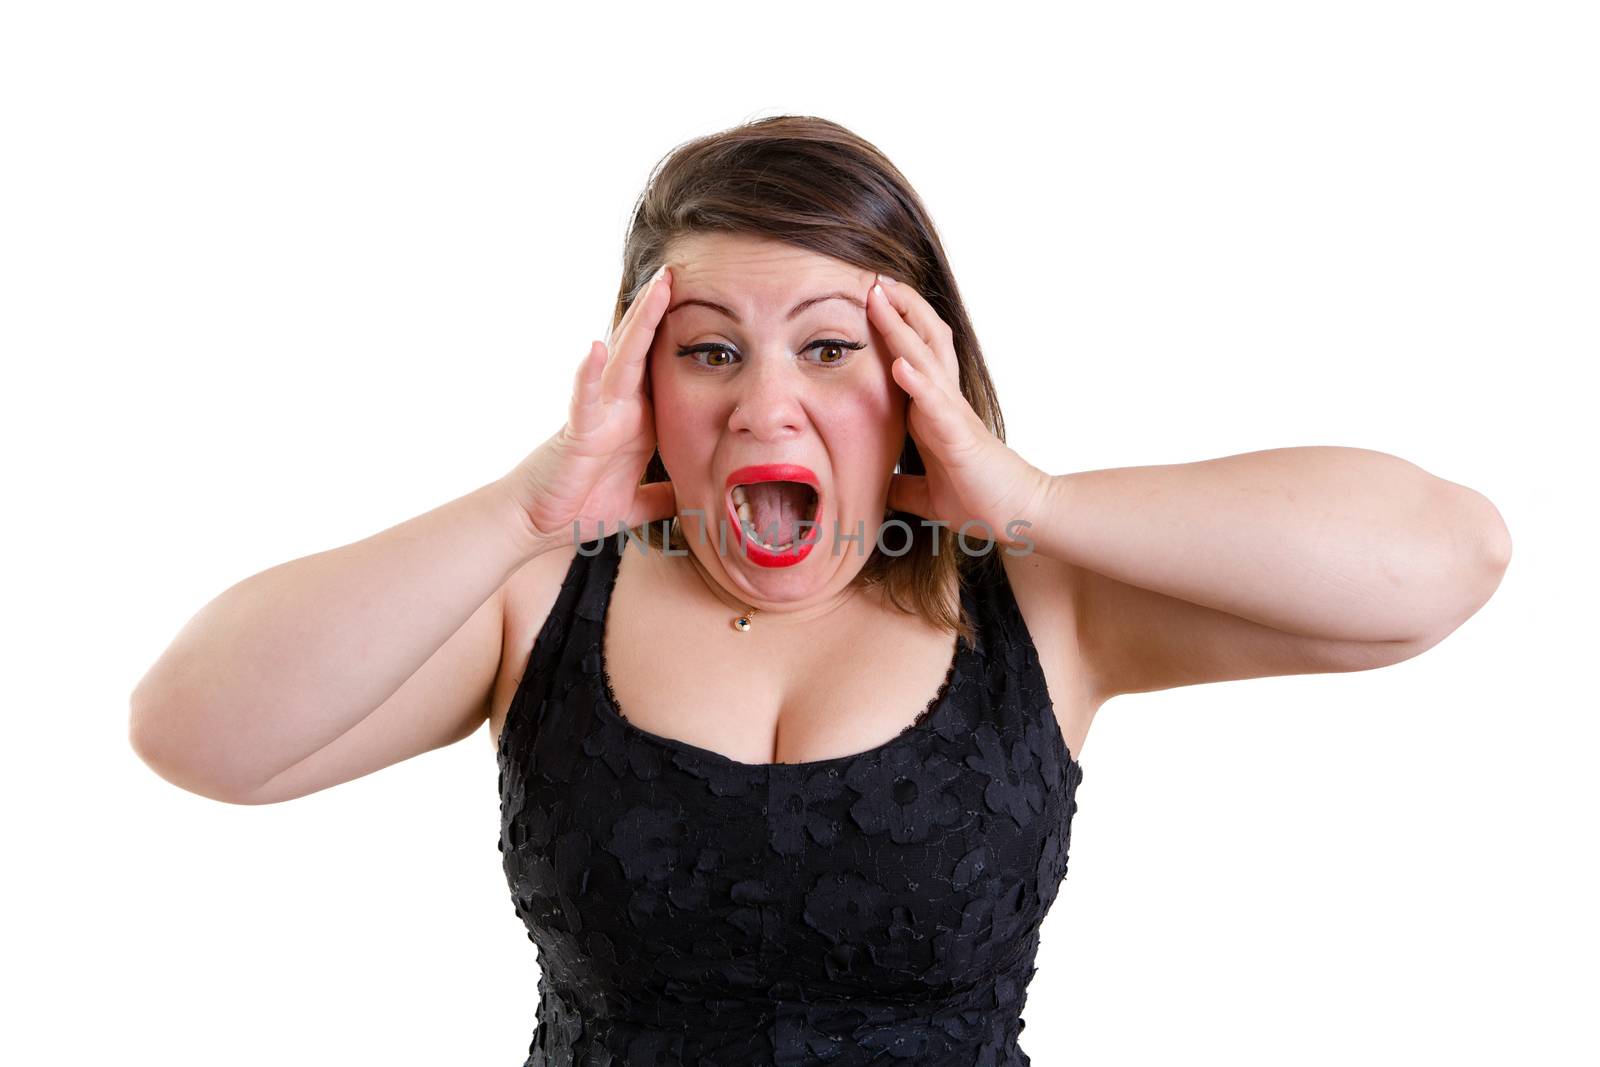 Terrified woman wearing low-cut sleeveless black top while holding her head with both hands as a gesture of panic and shock, isolated portrait with copy space on white